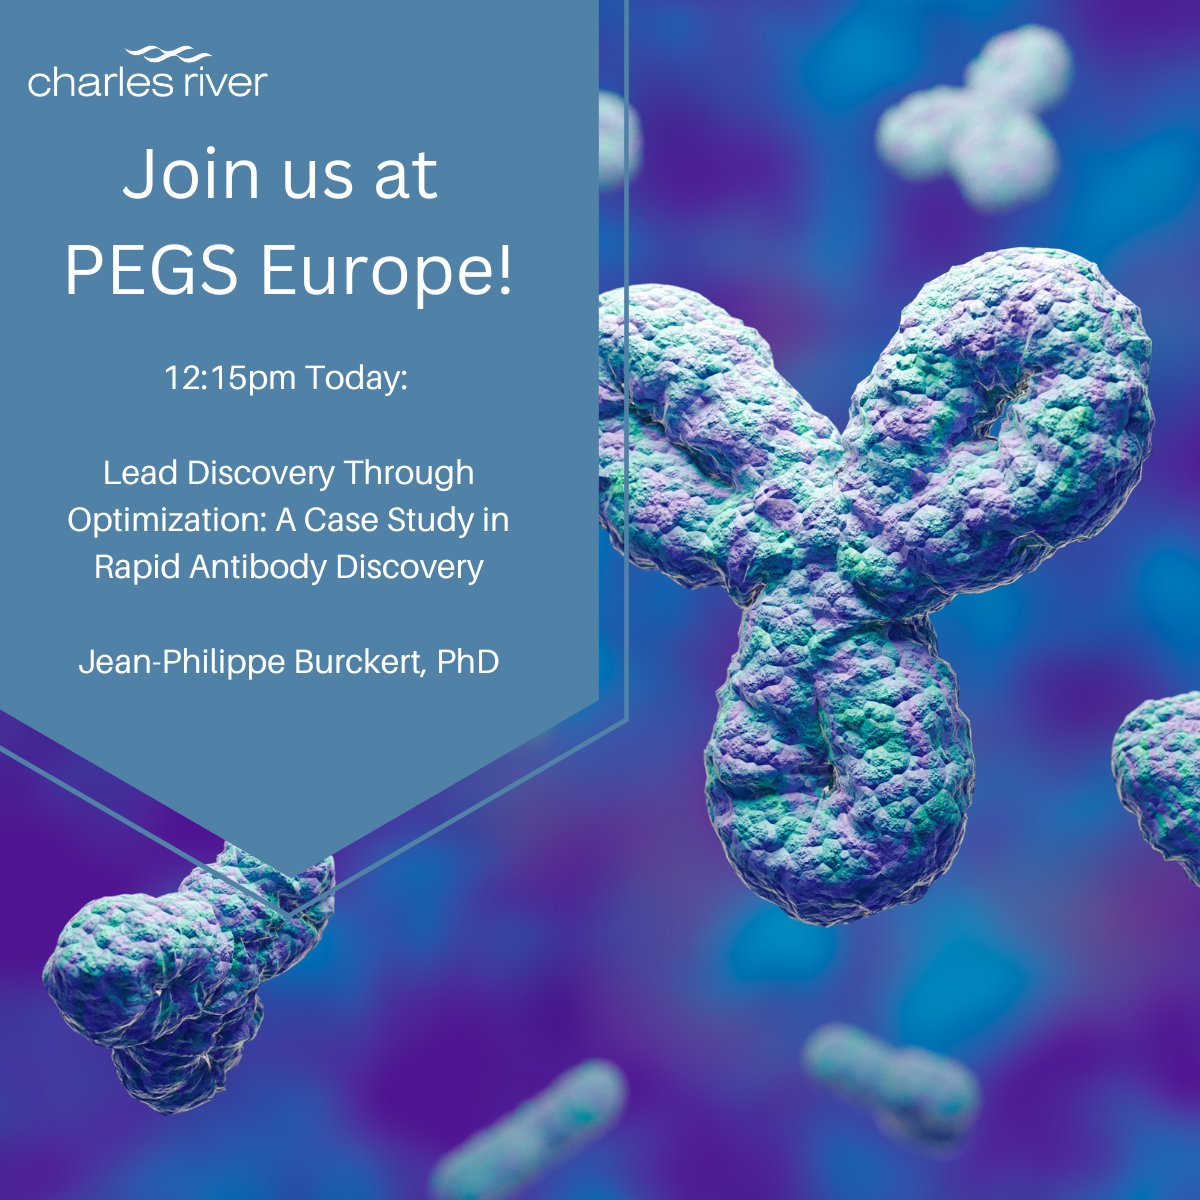 Our talk in the Optimization Track is starting soon at PEGS Europe, learn all about how a rapid antibody discovery can be your reality! bit.ly/3DAEUCr #PEGSEurope